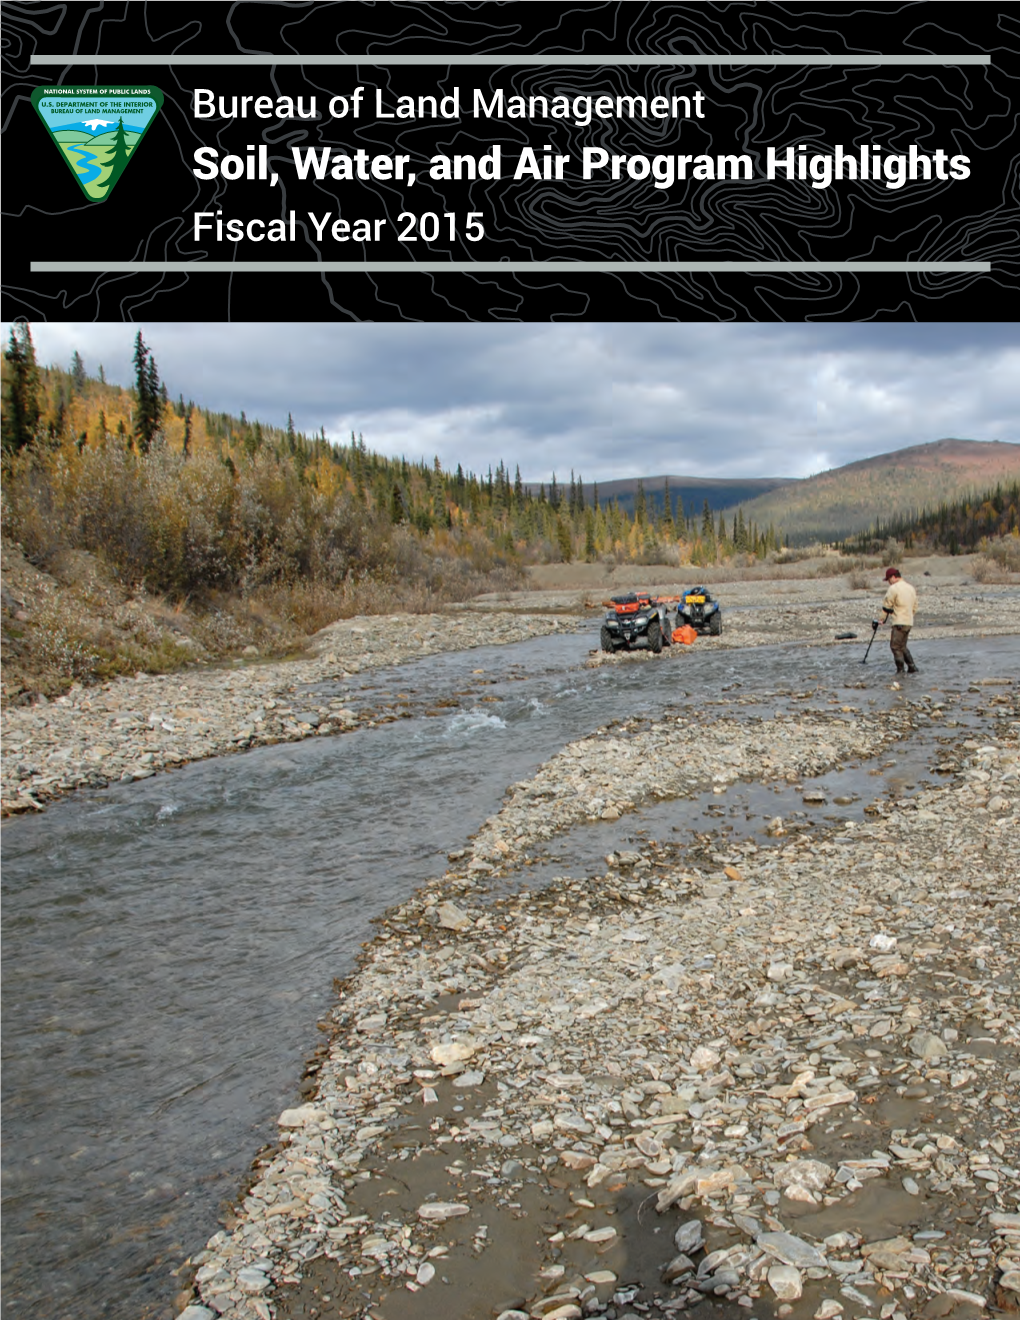 Bureau of Land Management Soil, Water, and Air Program Highlights Fiscal Year 2015 Alaska’S Mosquito Fork Wild and Scenic River and Fireweed on a Nearby Hillside